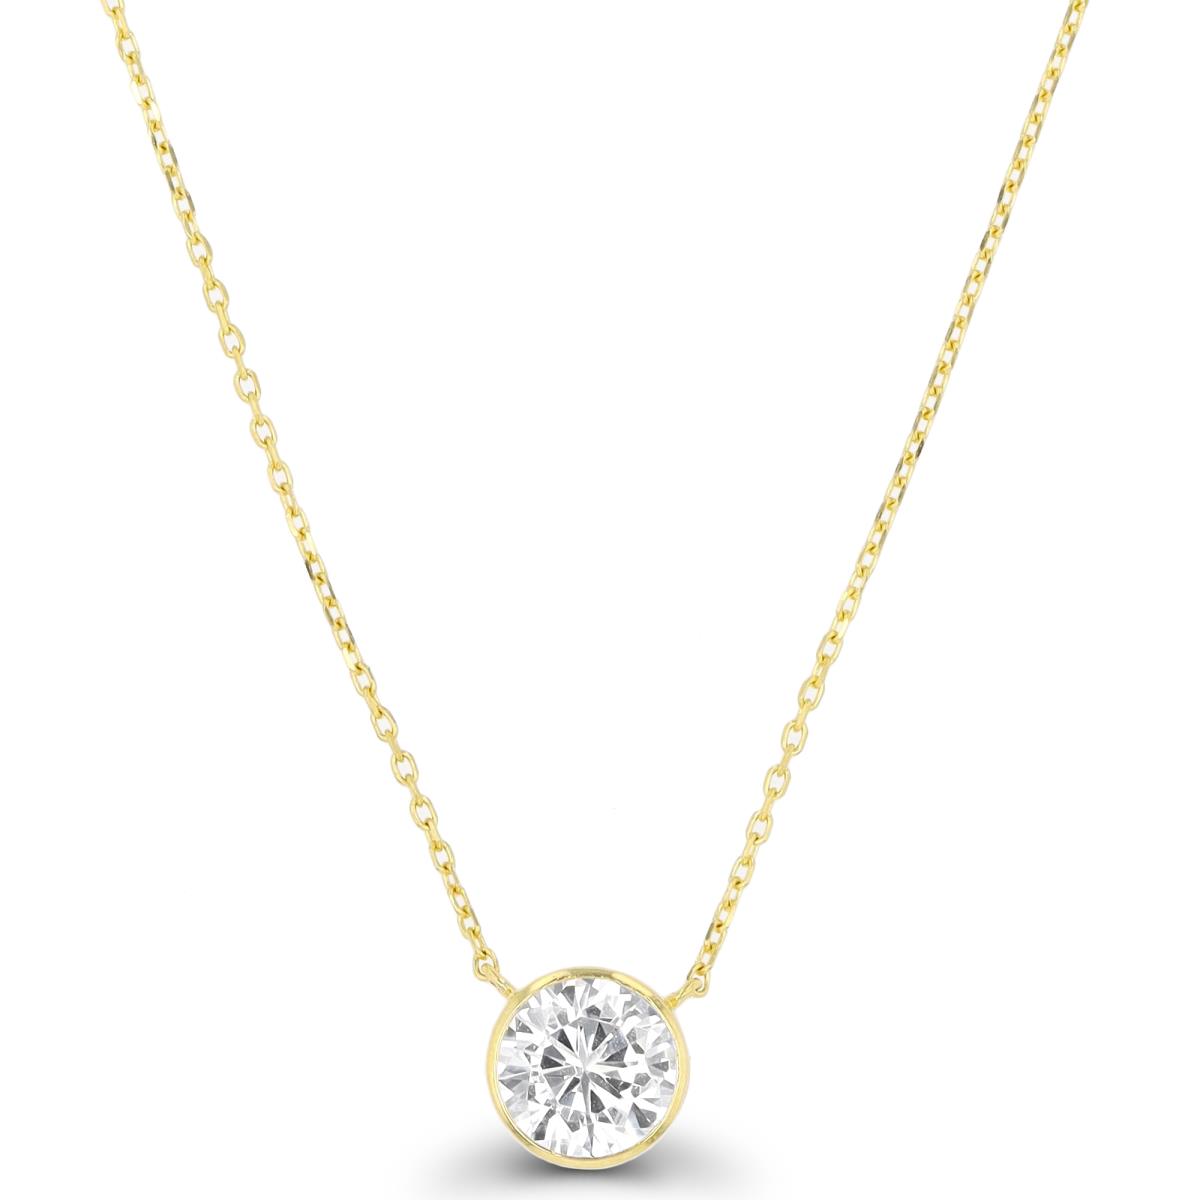 10K Yellow Gold 6mm Round CZ Solitaire 16"+2" Necklace